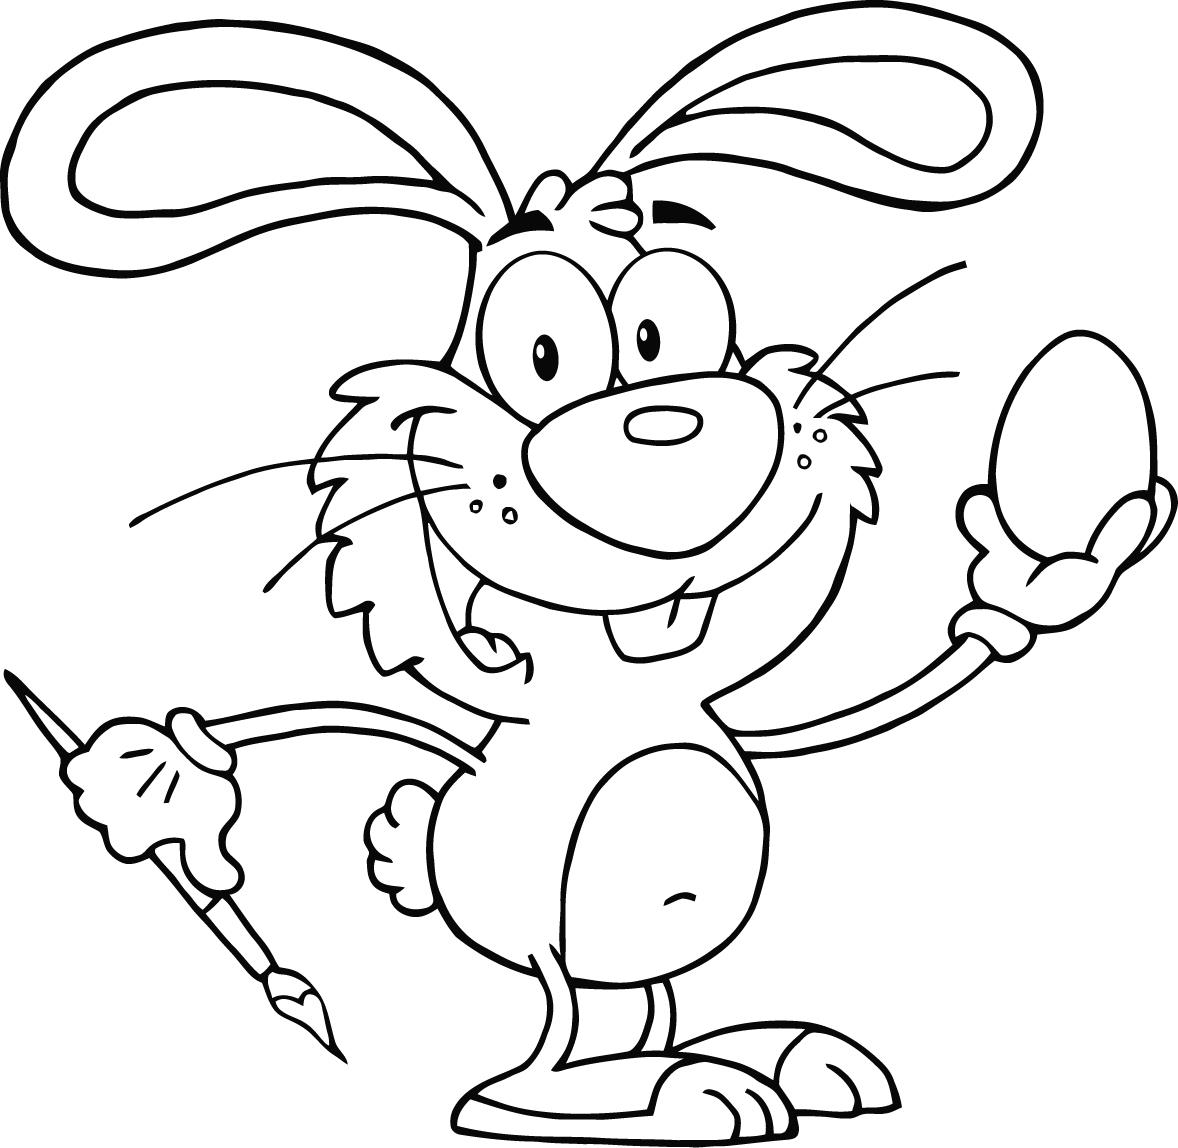 bunny pictures to color bunny coloring page projects to try bunny coloring to color pictures bunny 